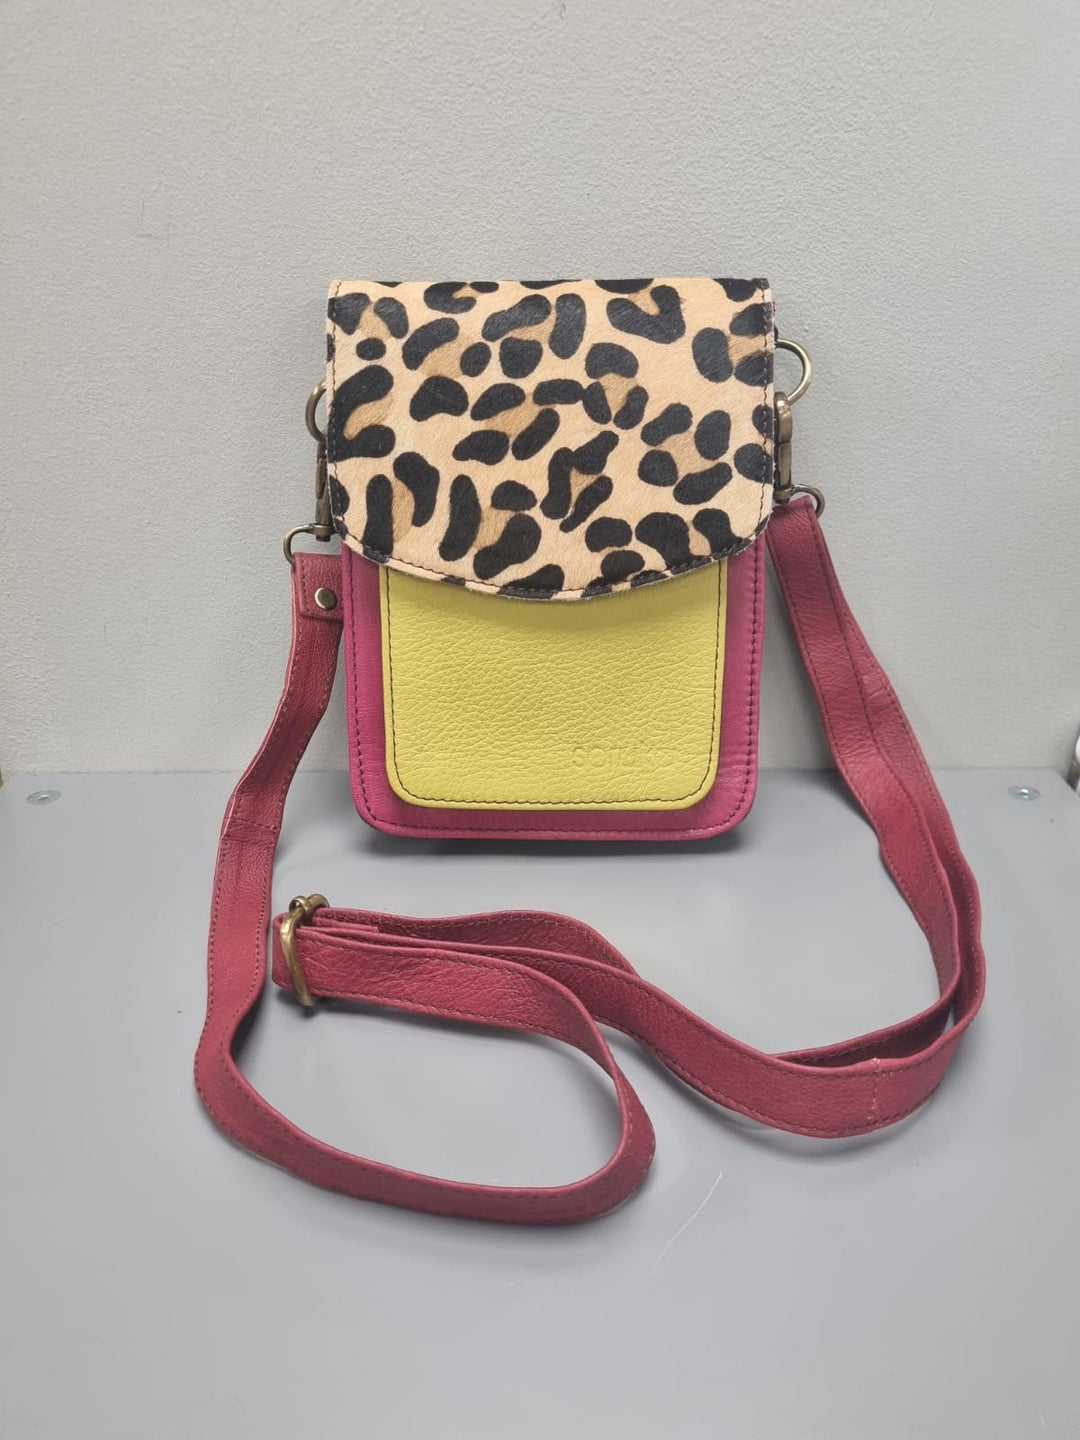 Aiko Leather Cross Body Bag - Pink And Lime Leather/ Animal Print